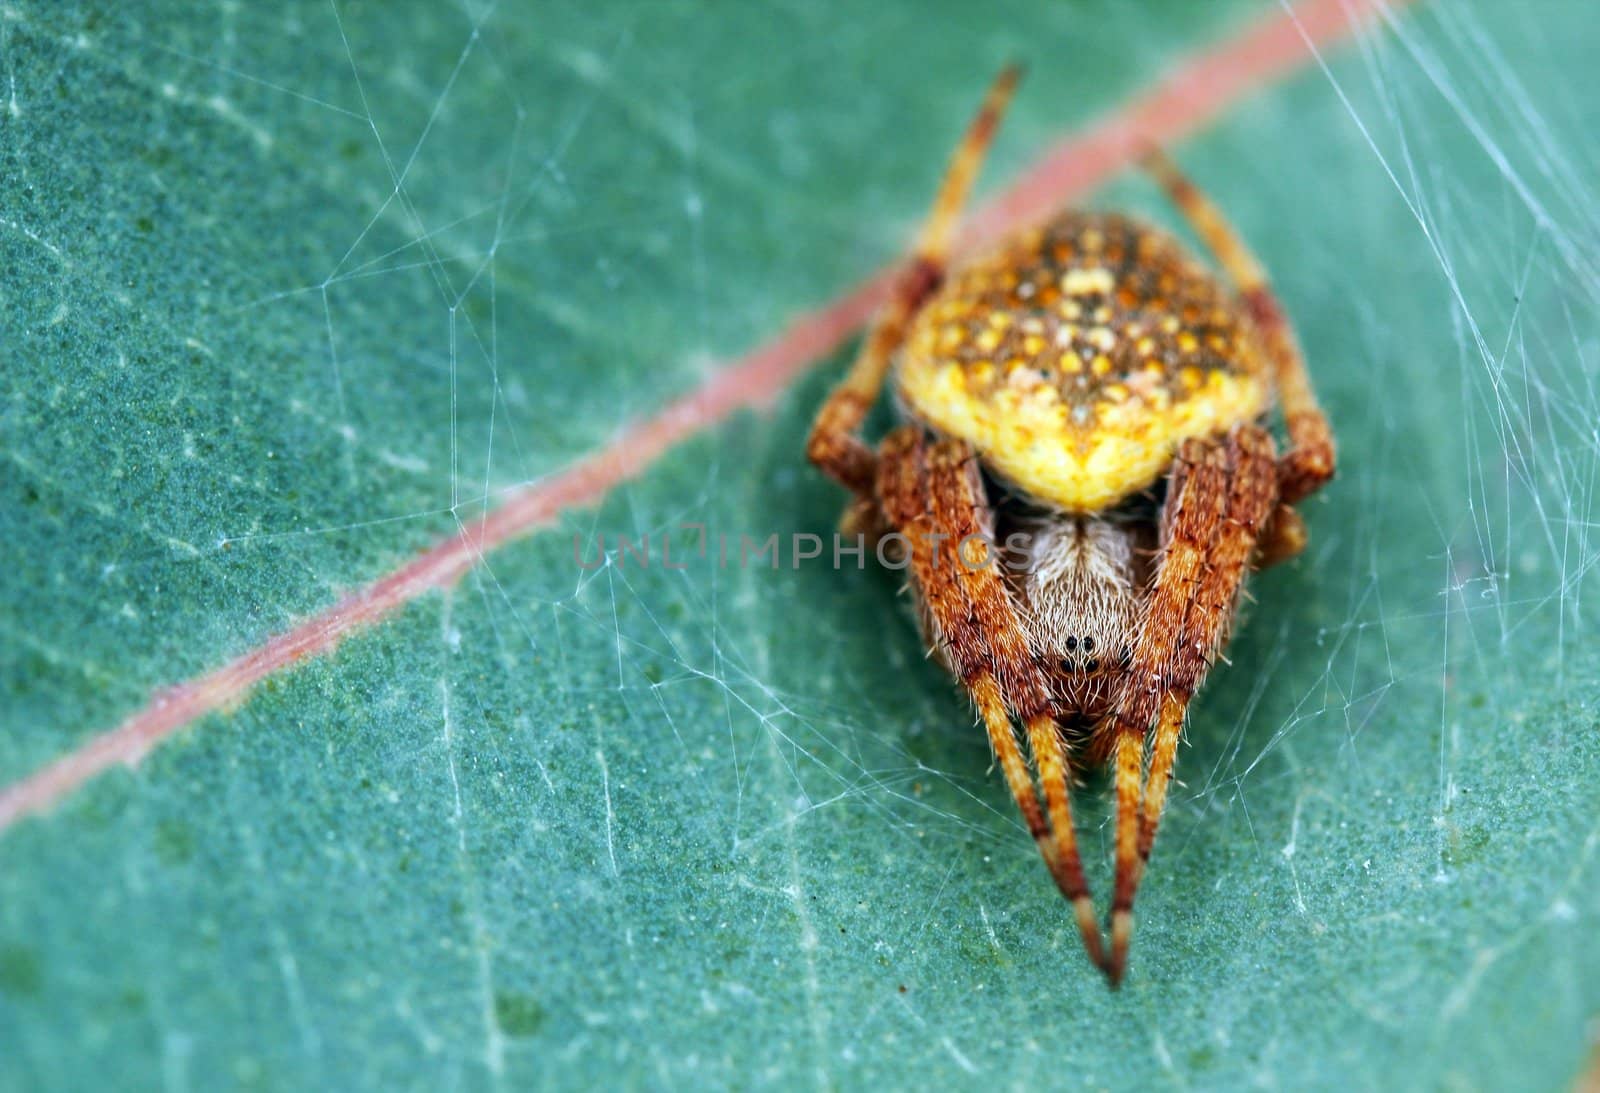 Attractive yellow colored hairy spider on a leaf waiting for its prey in its web